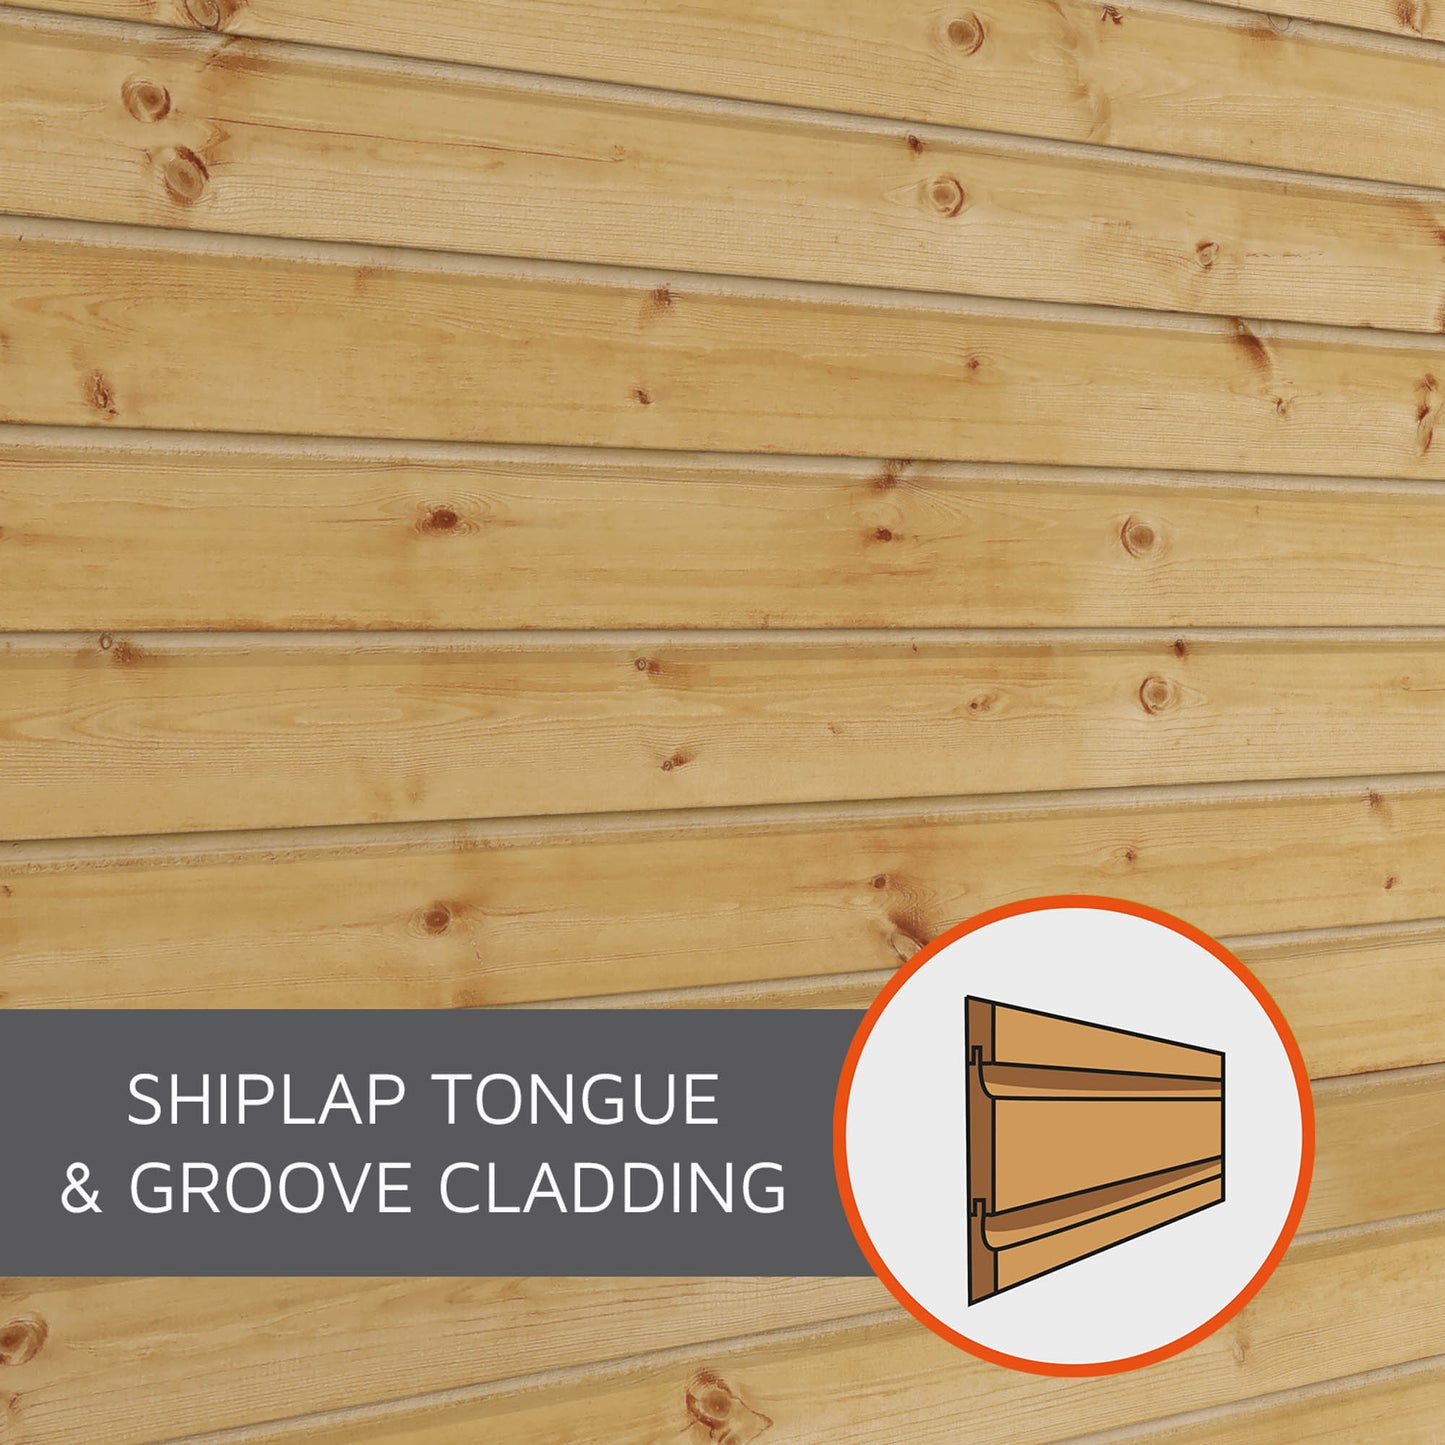 7 x 5 Shiplap Reverse Apex Windowless Wooden Shed